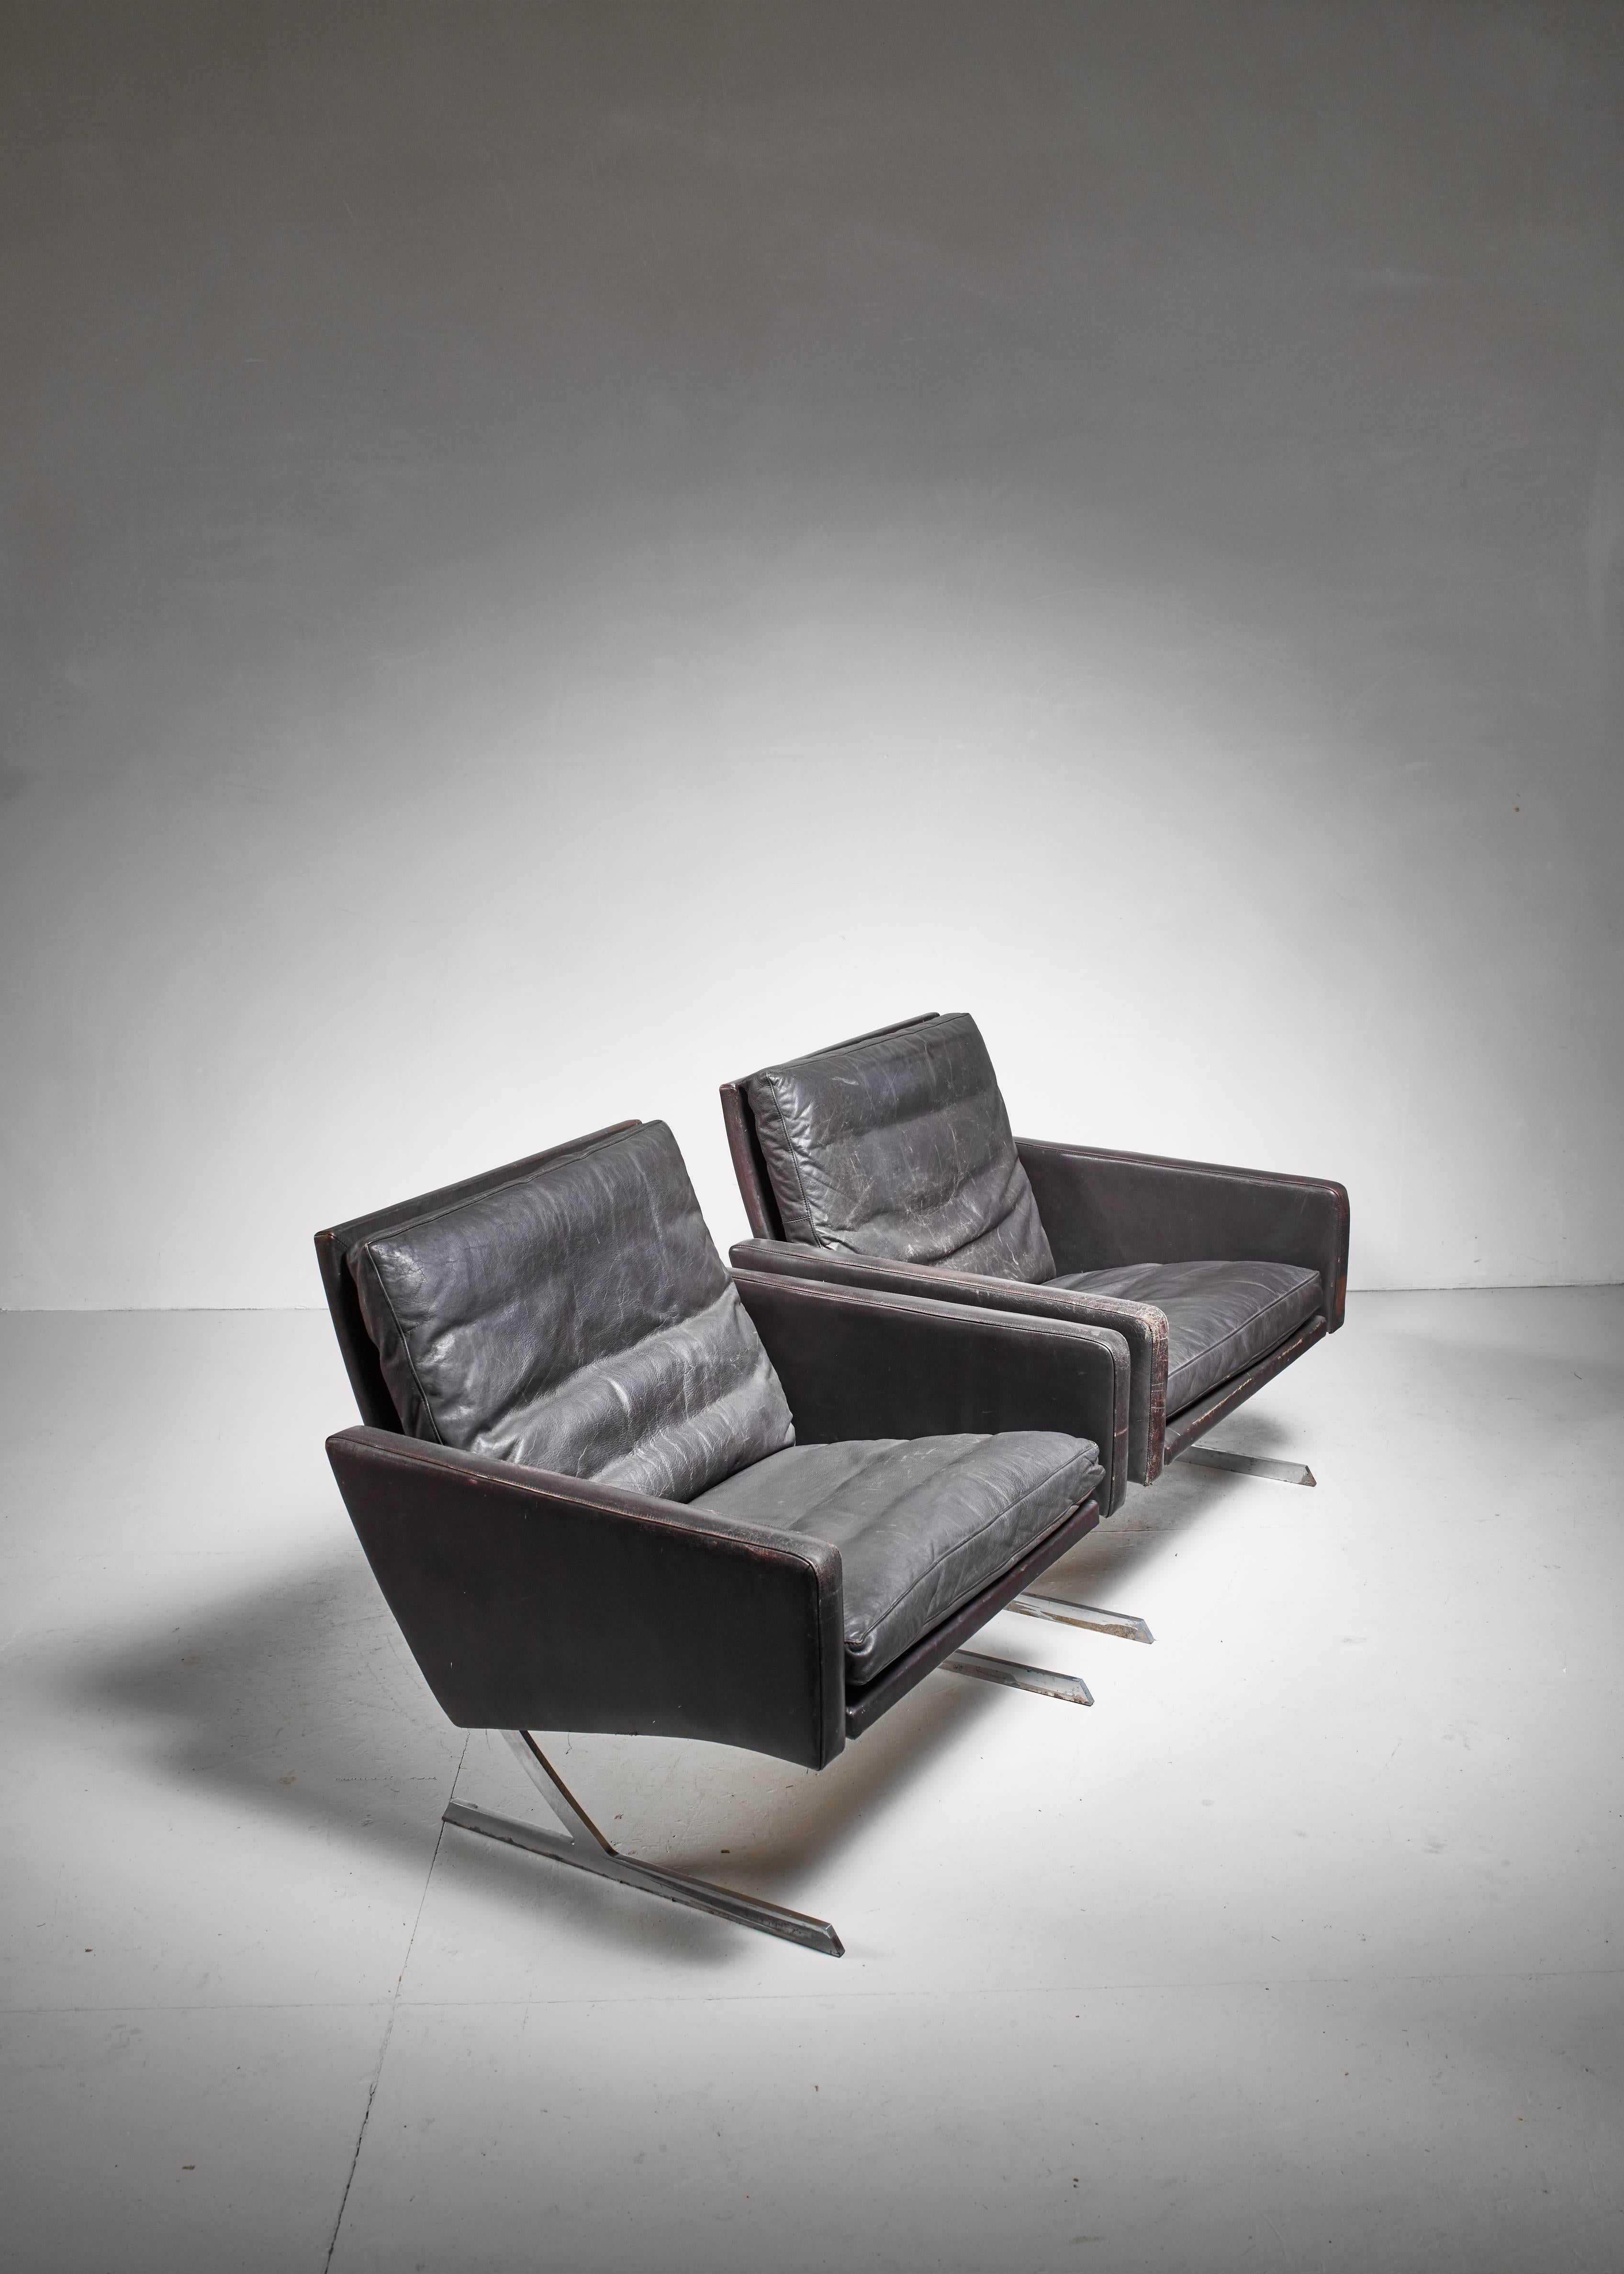 Steel Preben Fabricius Pair of BO 701 Chairs in Dark Brown Leather, Germany, 1970 For Sale